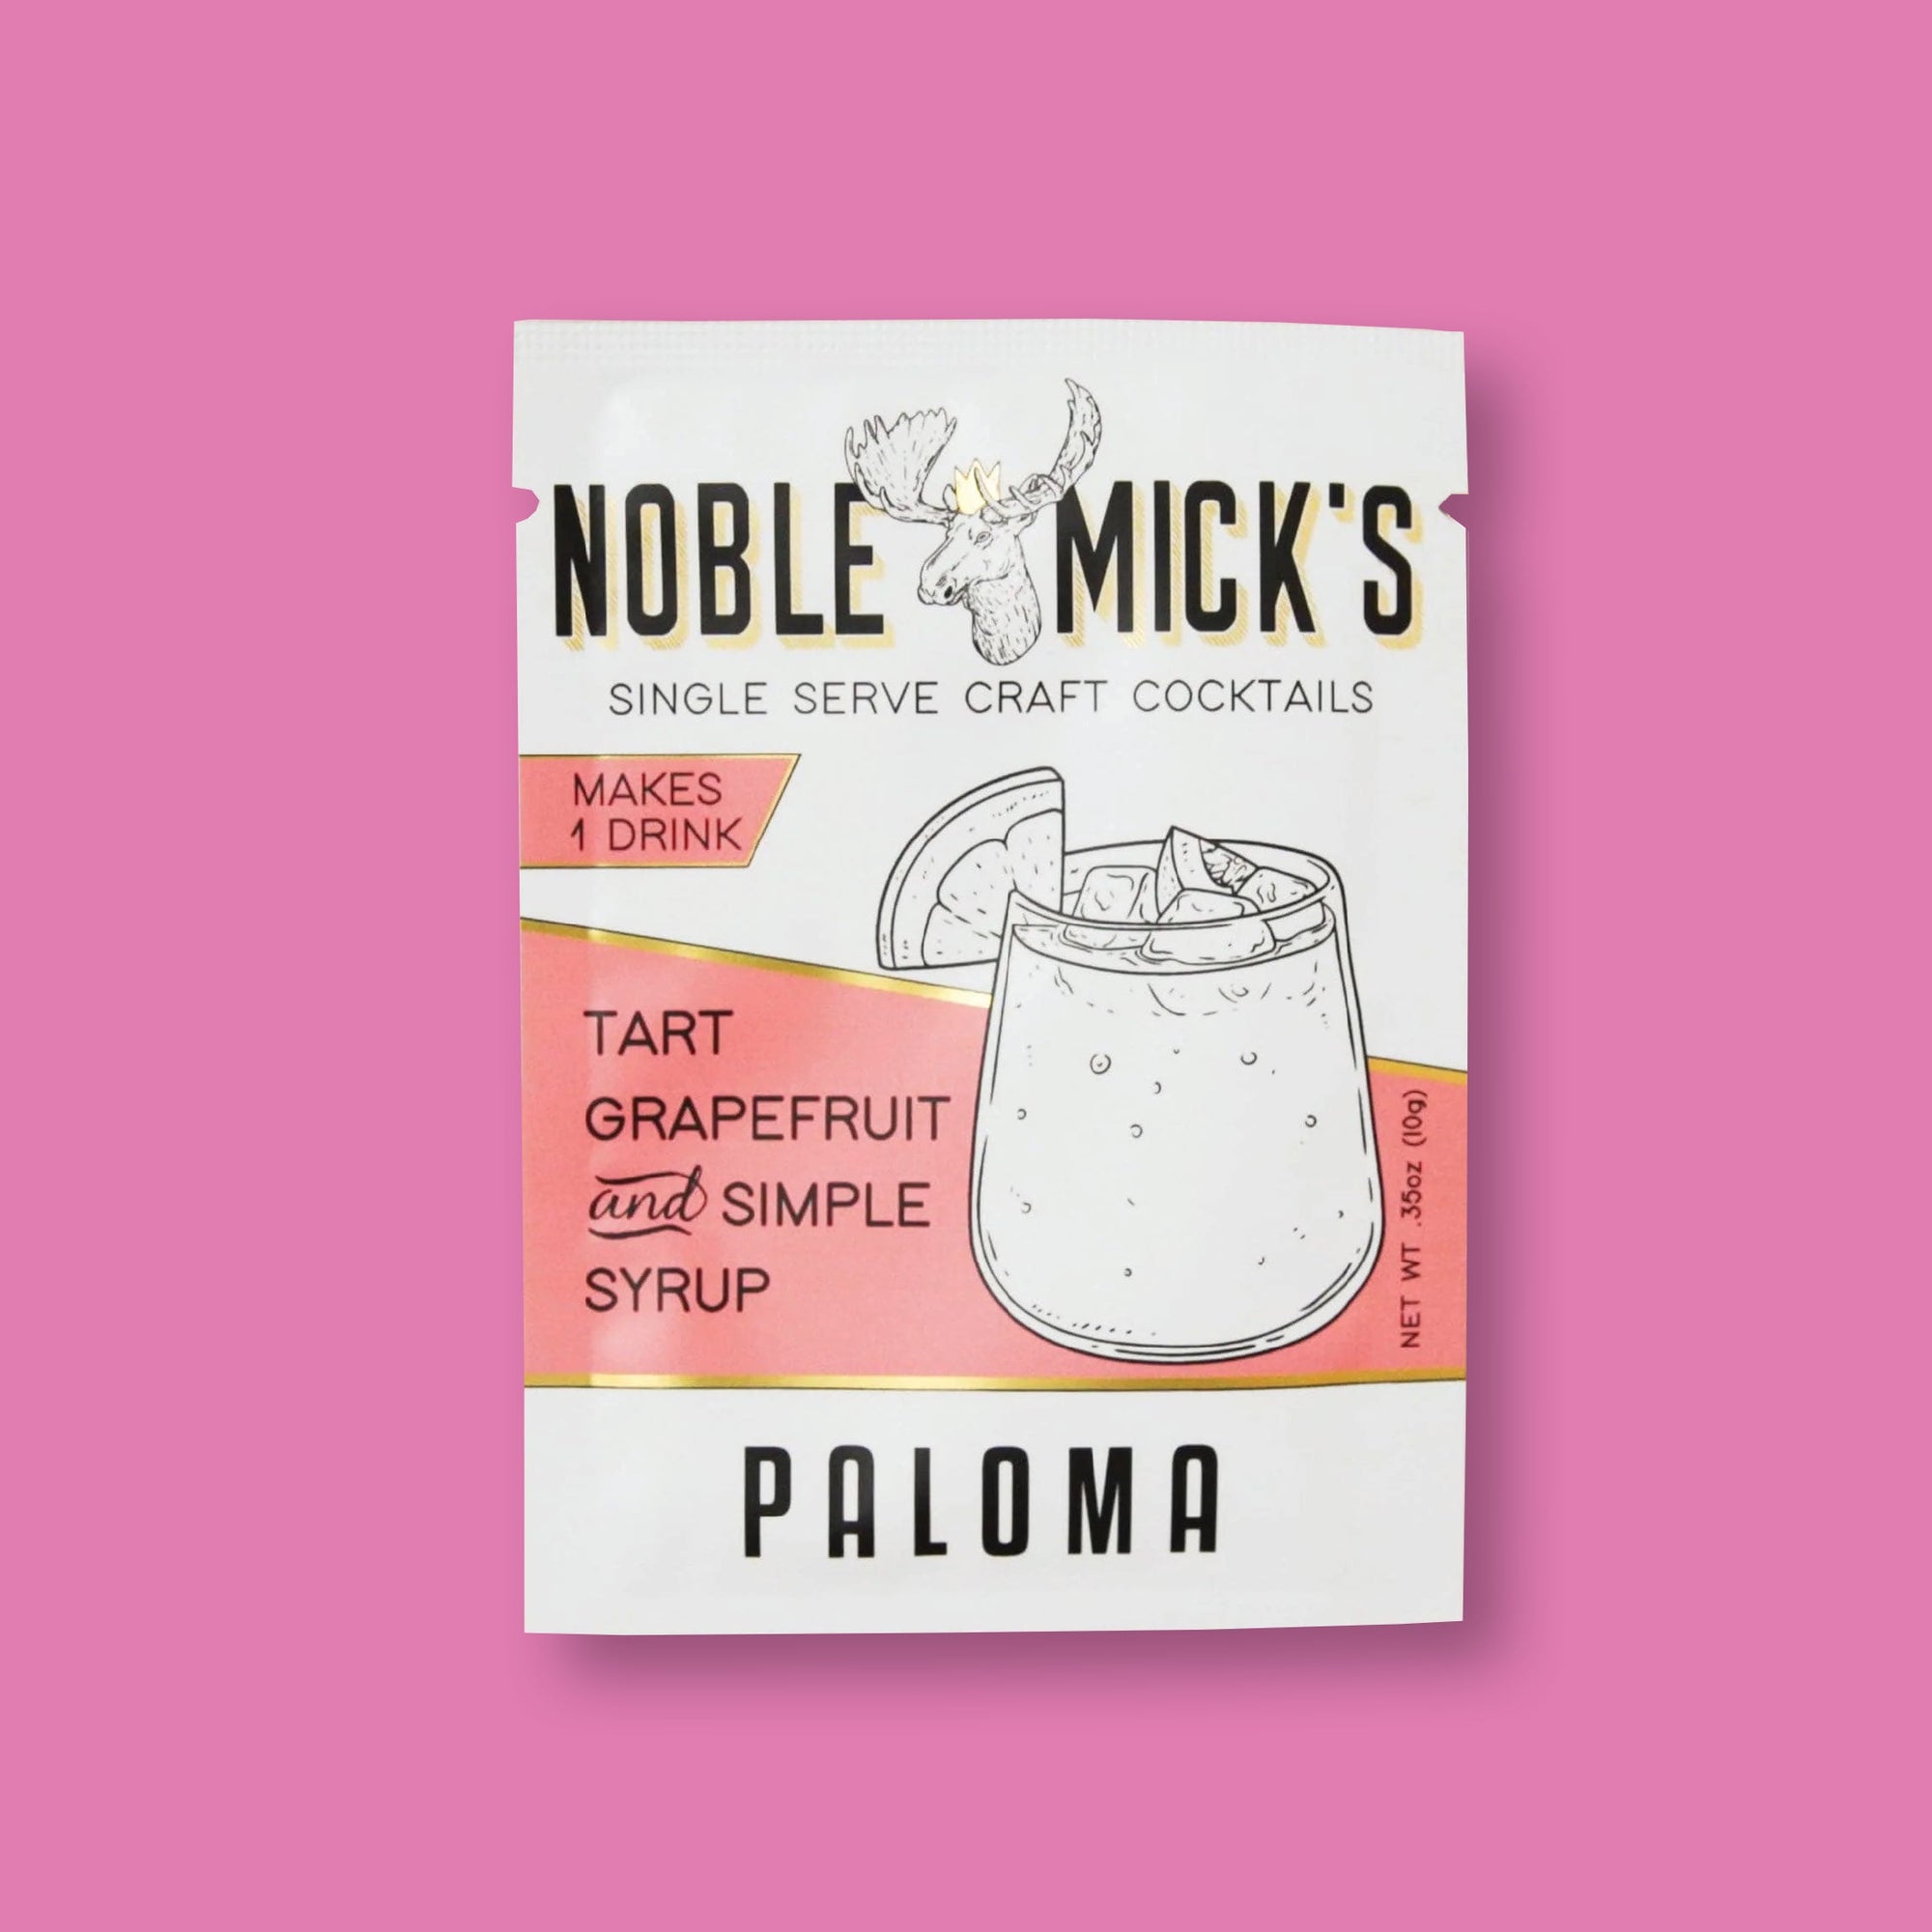 On a raspberry pink background sits a package. This white package has pink and gold labels and black, all caps block lettering. There is an illustration of a moose head and a bloody mary glass. It says "NOBLE MICK'S SINGLE SERVE CRAFT COCKTAILS," "MAKES 1 DRINK," "TART GRAPEFRUIT and SIMPLY SYRUP," "PALOMA." Net wt .35oz (10g)